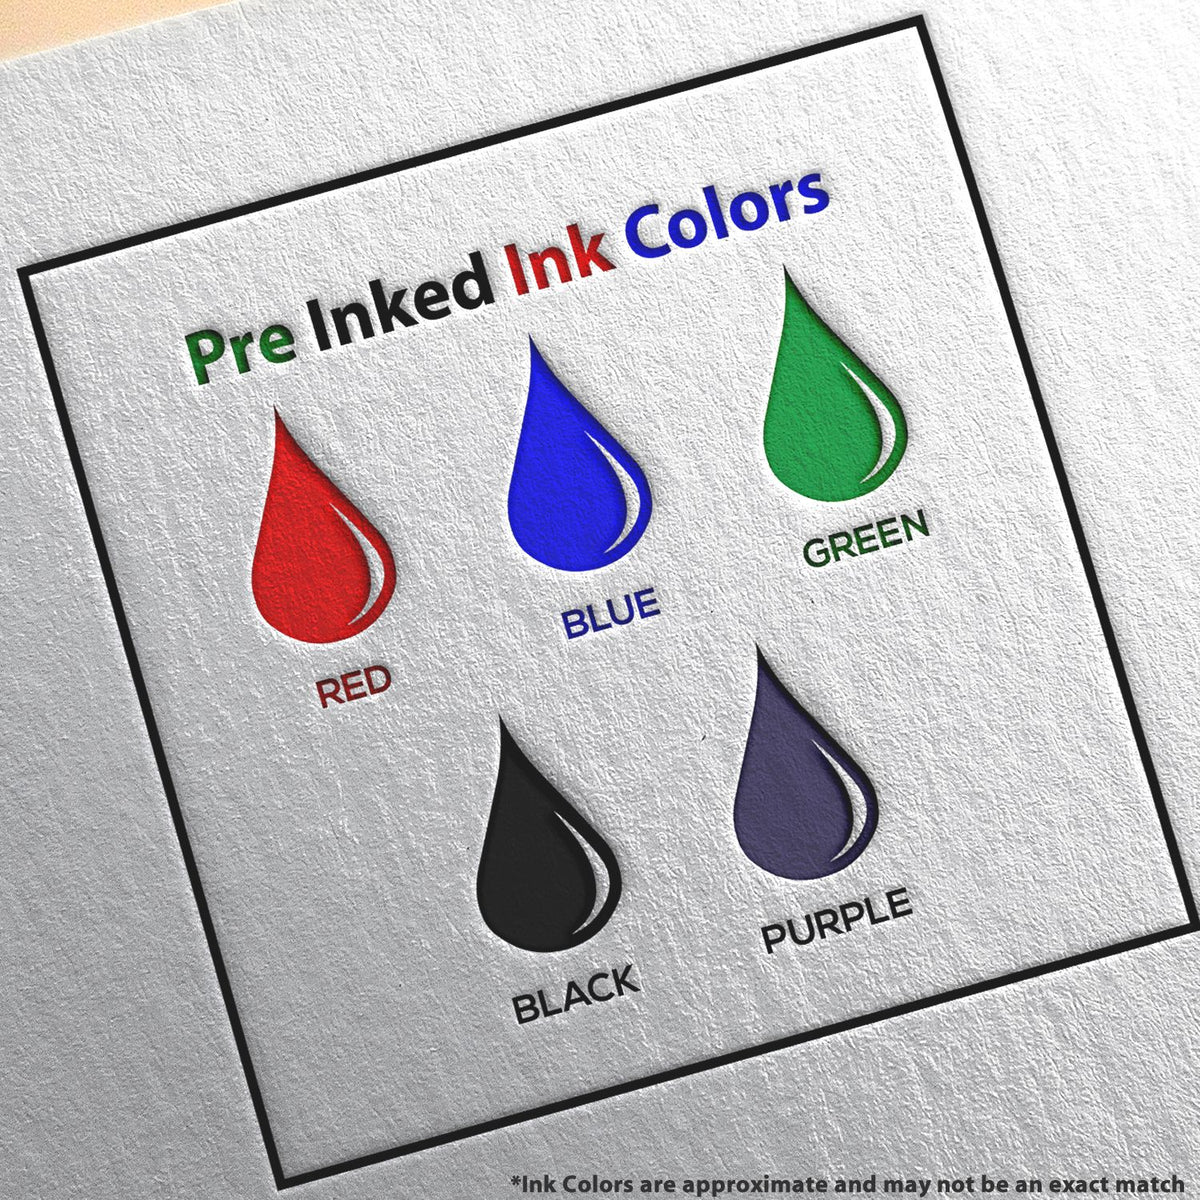 A picture showing the different ink colors or hues available for the Super Slim Massachusetts Notary Public Stamp product.